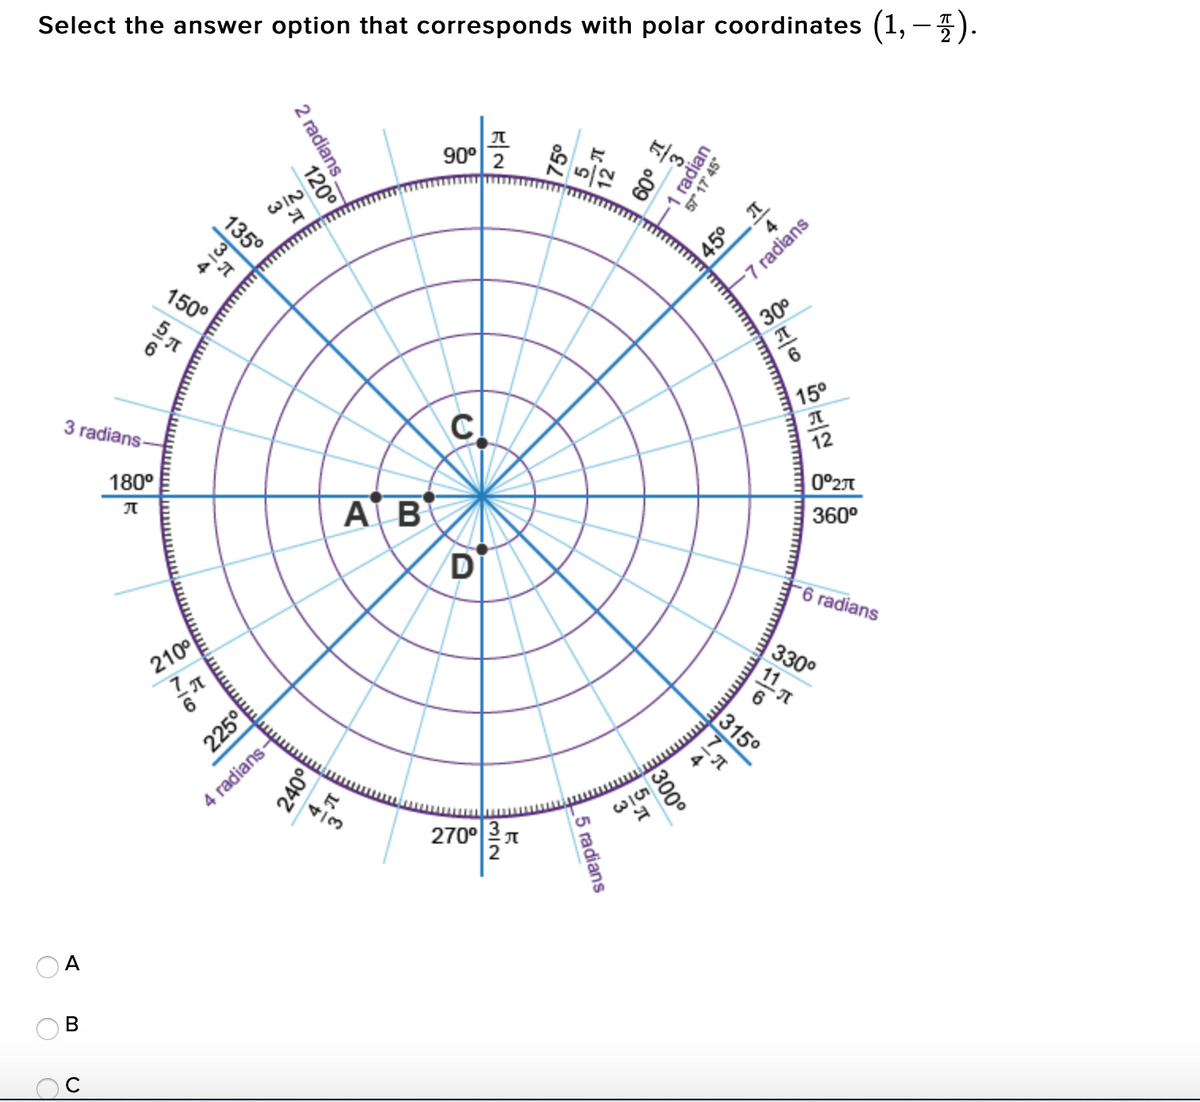 Select the answer option that corresponds with polar coordinates (1,-).
90° 2
WIN
135°
4
150°
7 radians
30°
3 radians
15°
180°
12
AB
| 0°27
360°
D
-6 radians
210°
330°
225°
315°
4
4 radians-
4/3
270°
A
В
57" 17' 45"
o09
radian
45°
2 radians.
120°
111
300°
_5 radians
7/6
